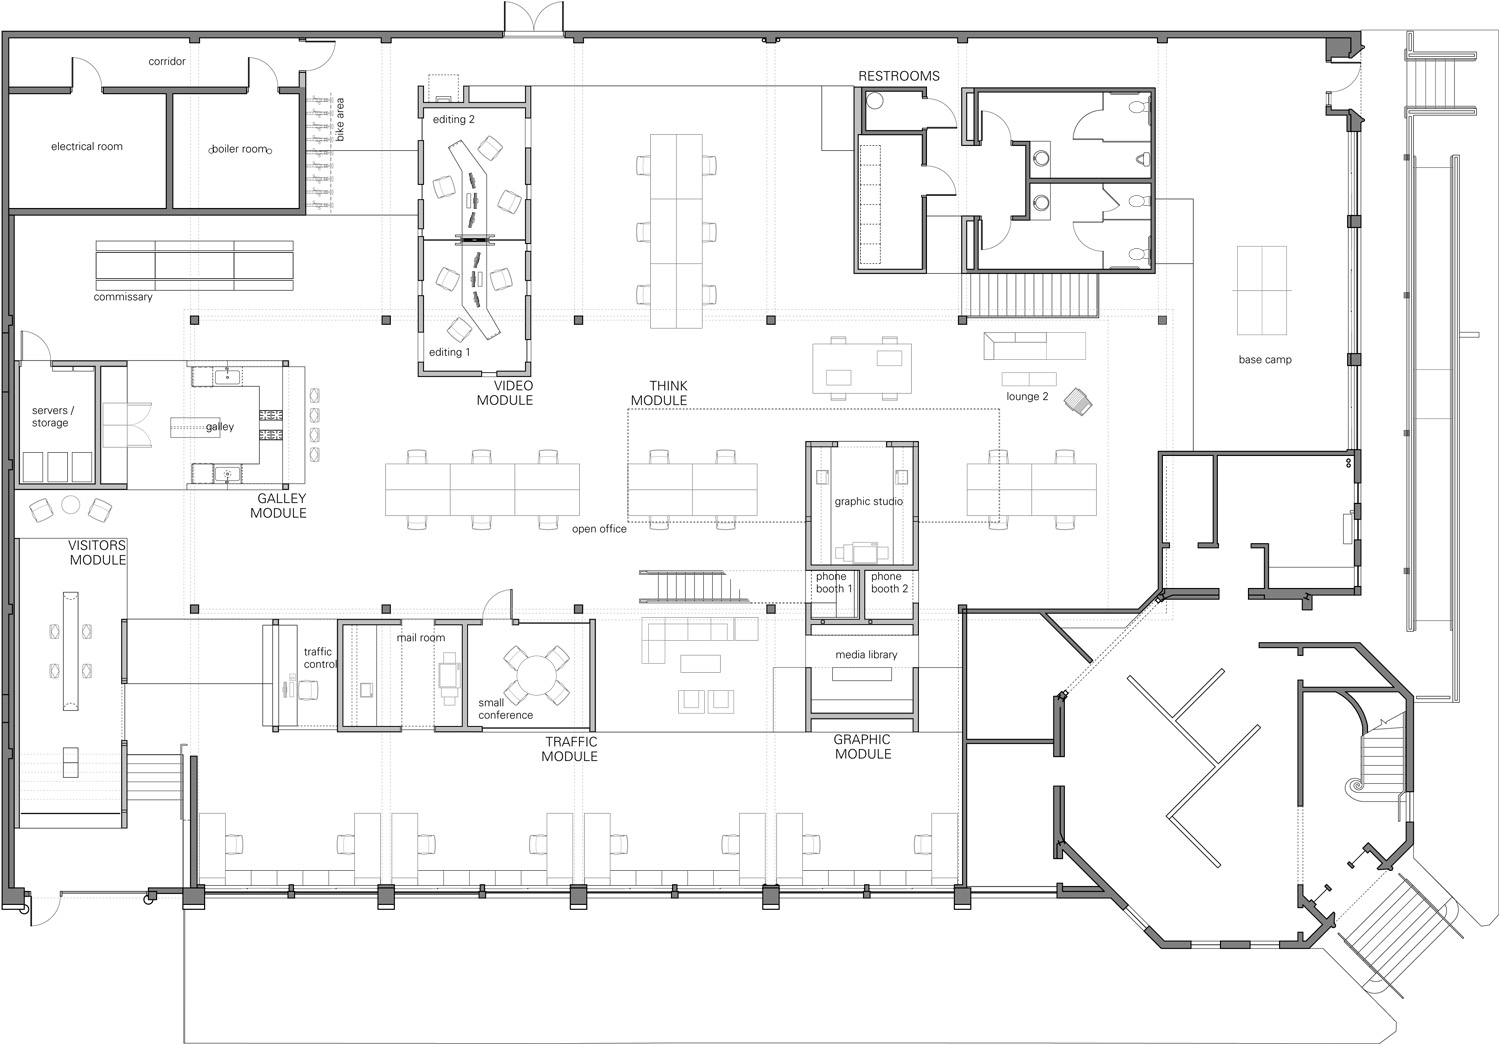 Architectural Floor Plans Office Building HomeDesignPictures